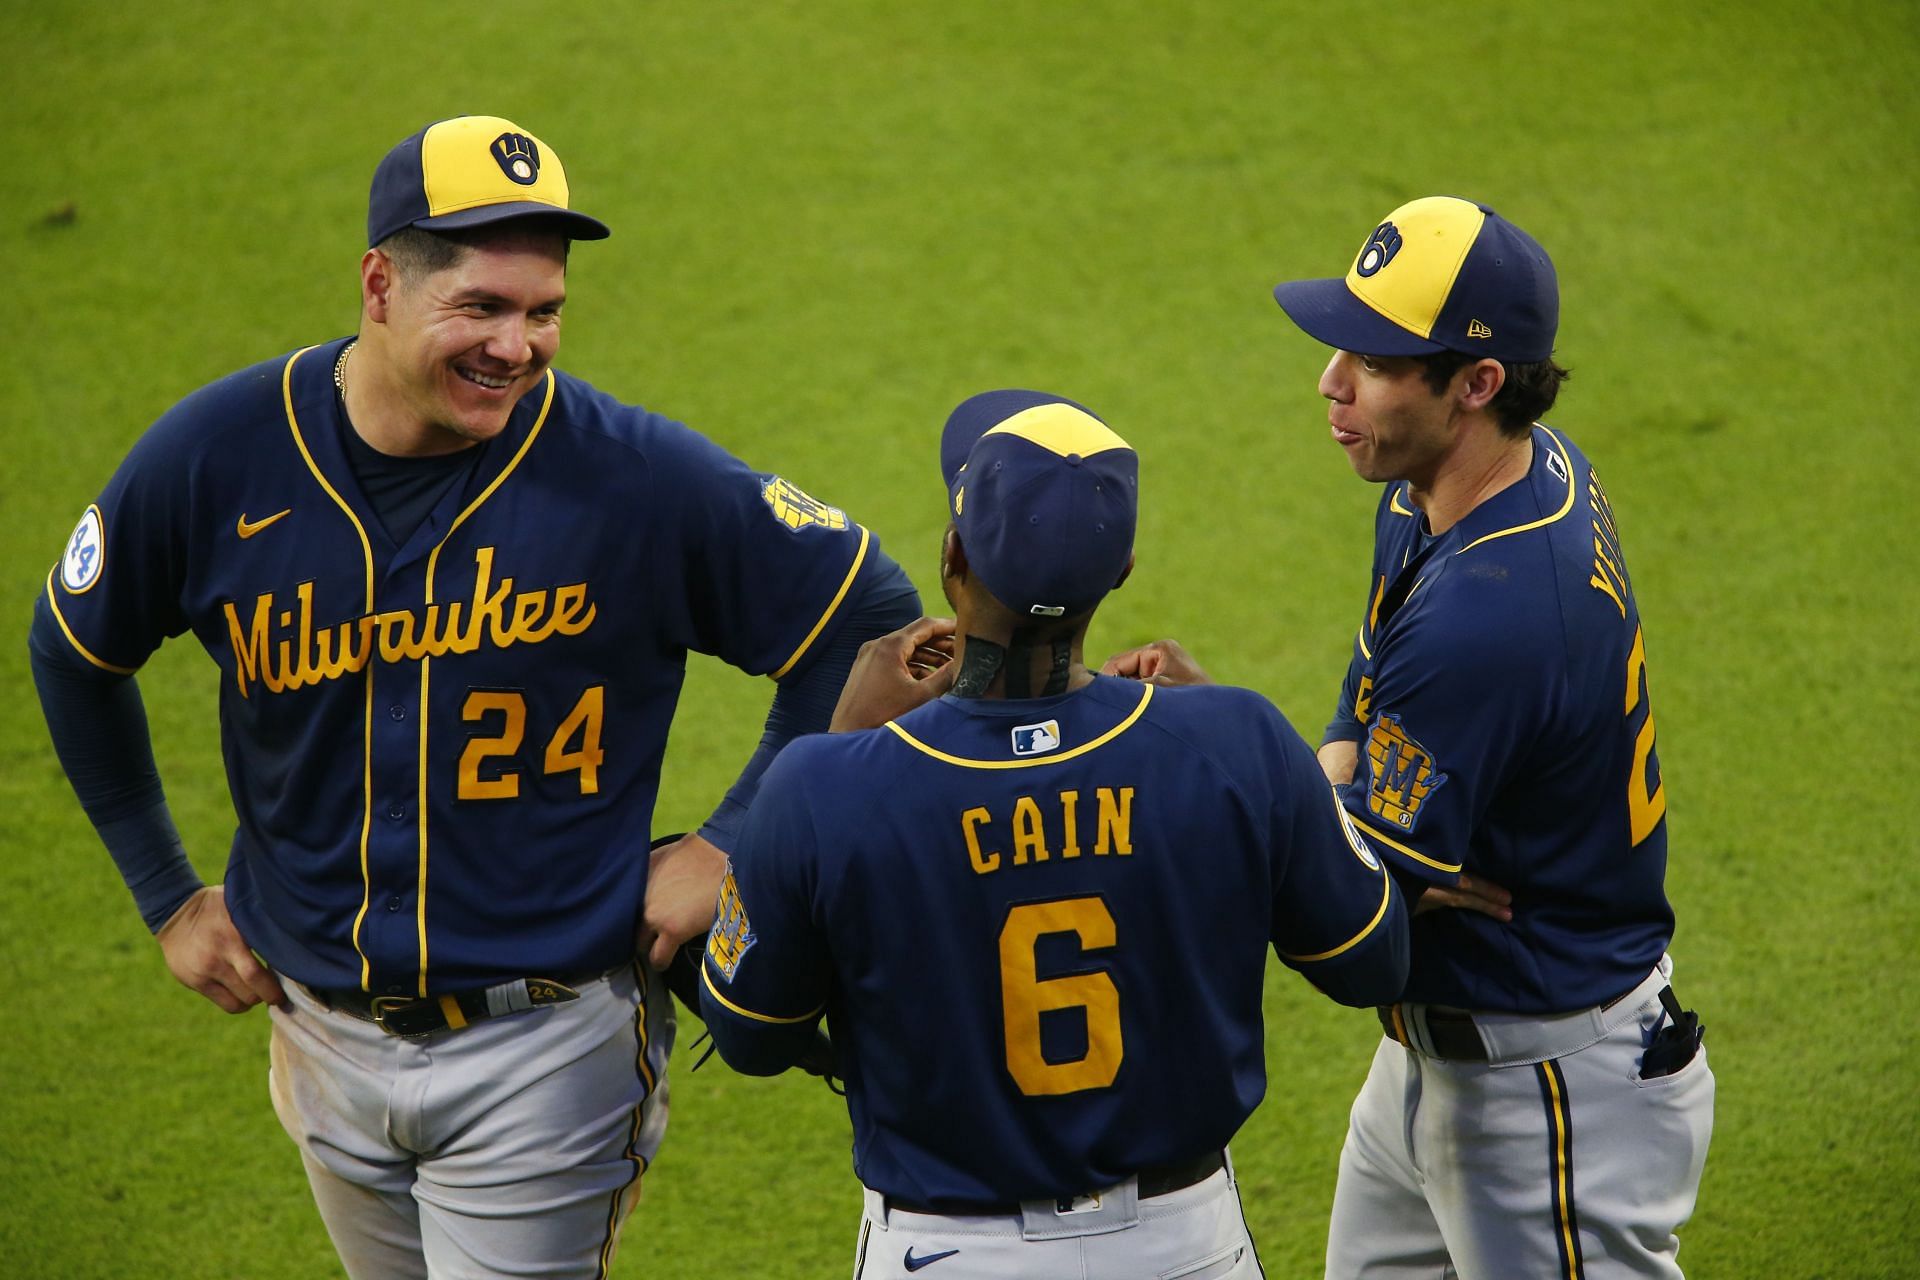 Get ready to bring a brand-new lineup - Milwaukee Brewers